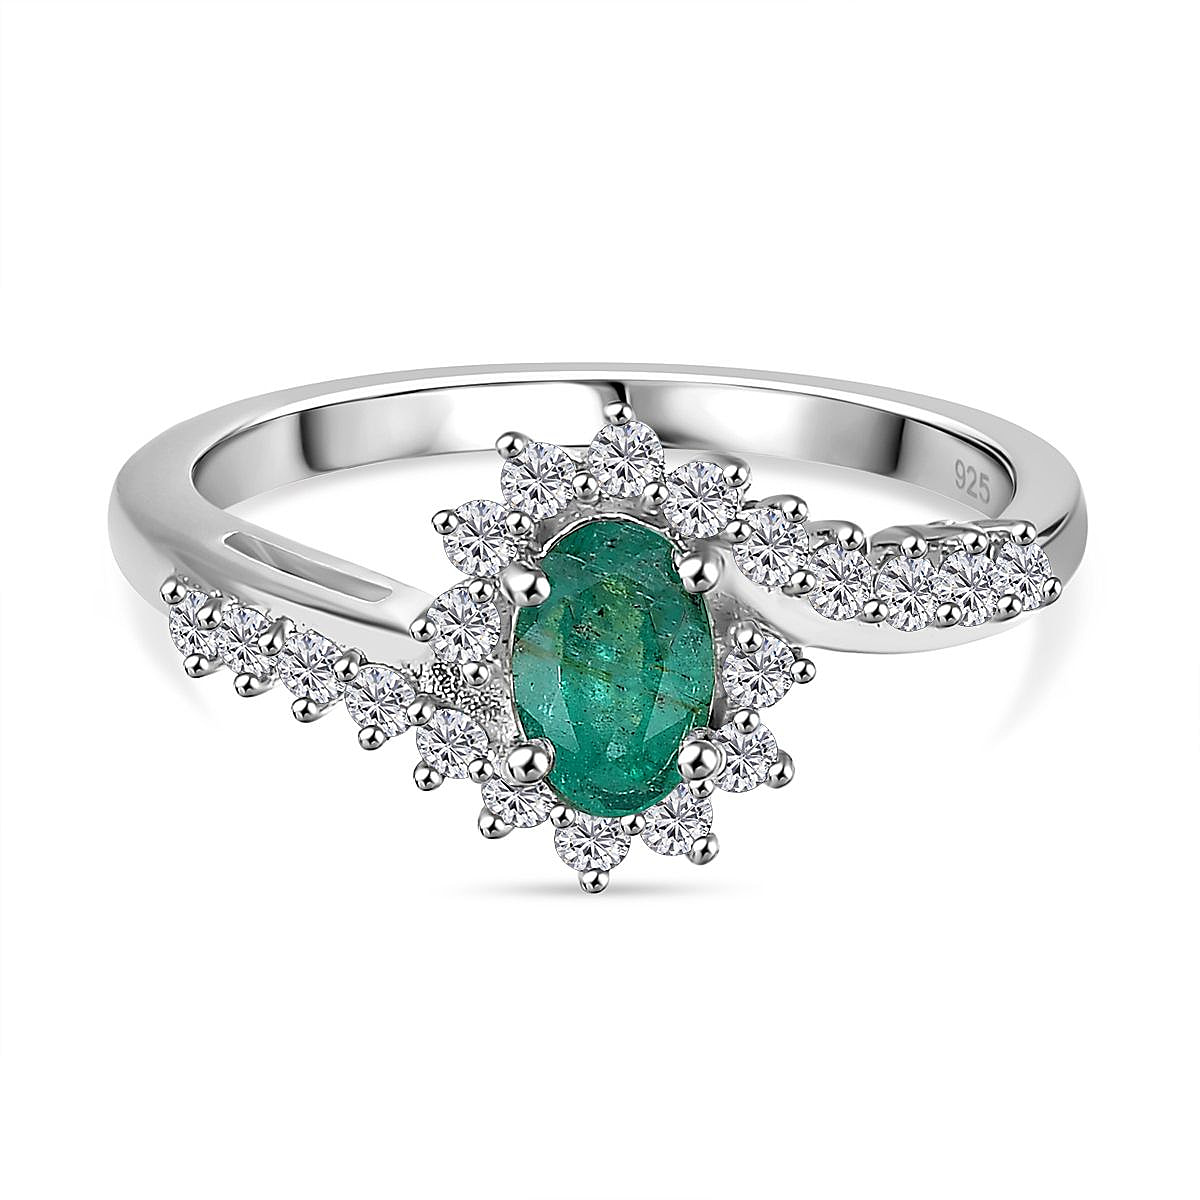 Emerald & Natural Zircon Bypass Ring in Platinum Overlay Sterling Silver